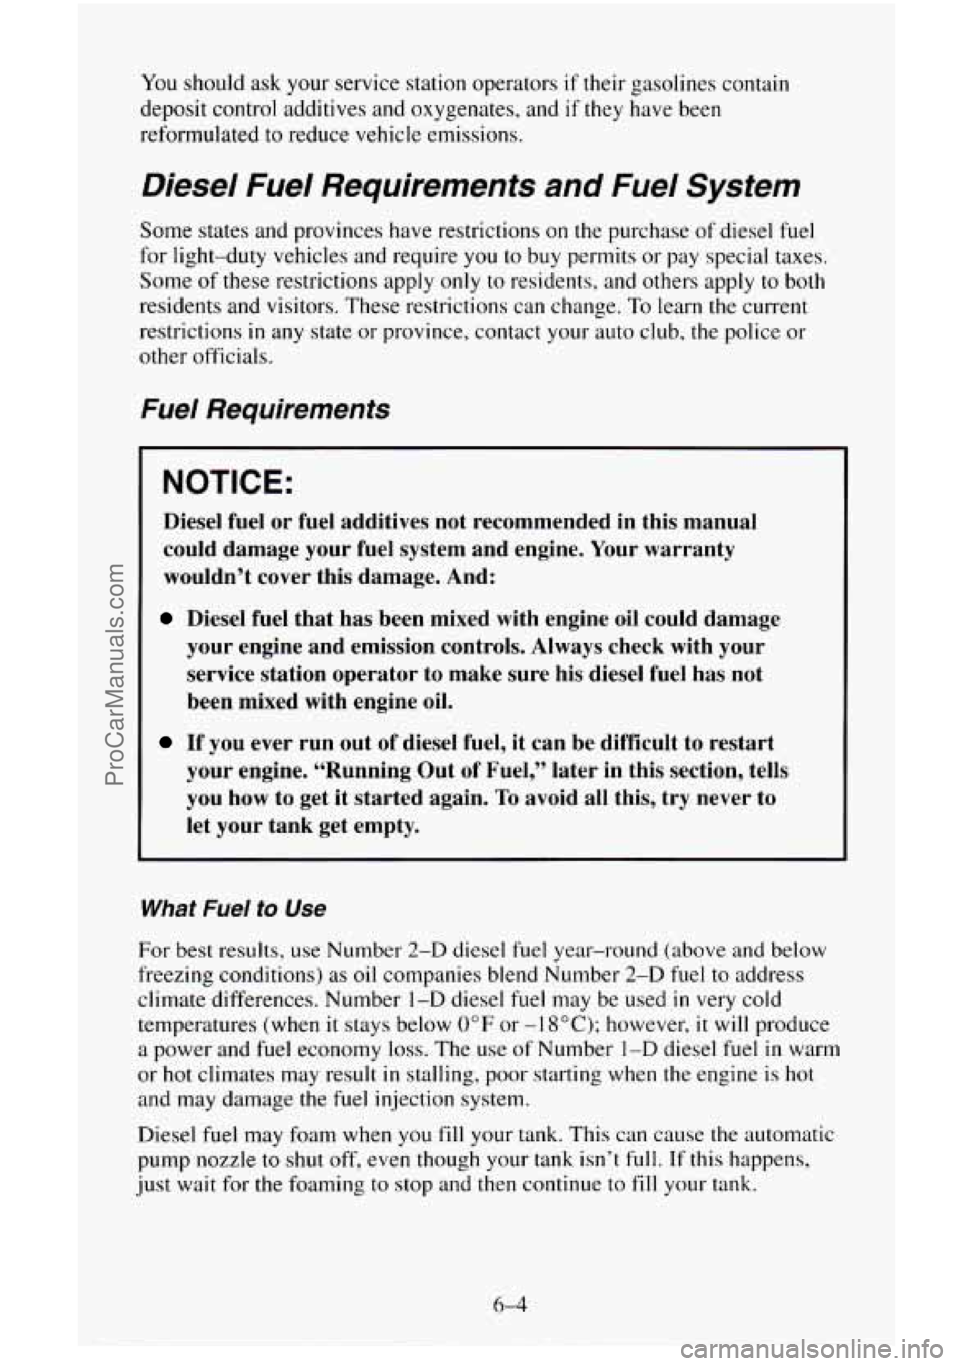 CHEVROLET SUBURBAN 1996  Owners Manual You should ask your  service  station operators if their gasolines contain 
deposit  control additives  and oxygenates, and 
if they have  been 
reformulated 
to reduce vehicle emissions. 
Diesel  Fue